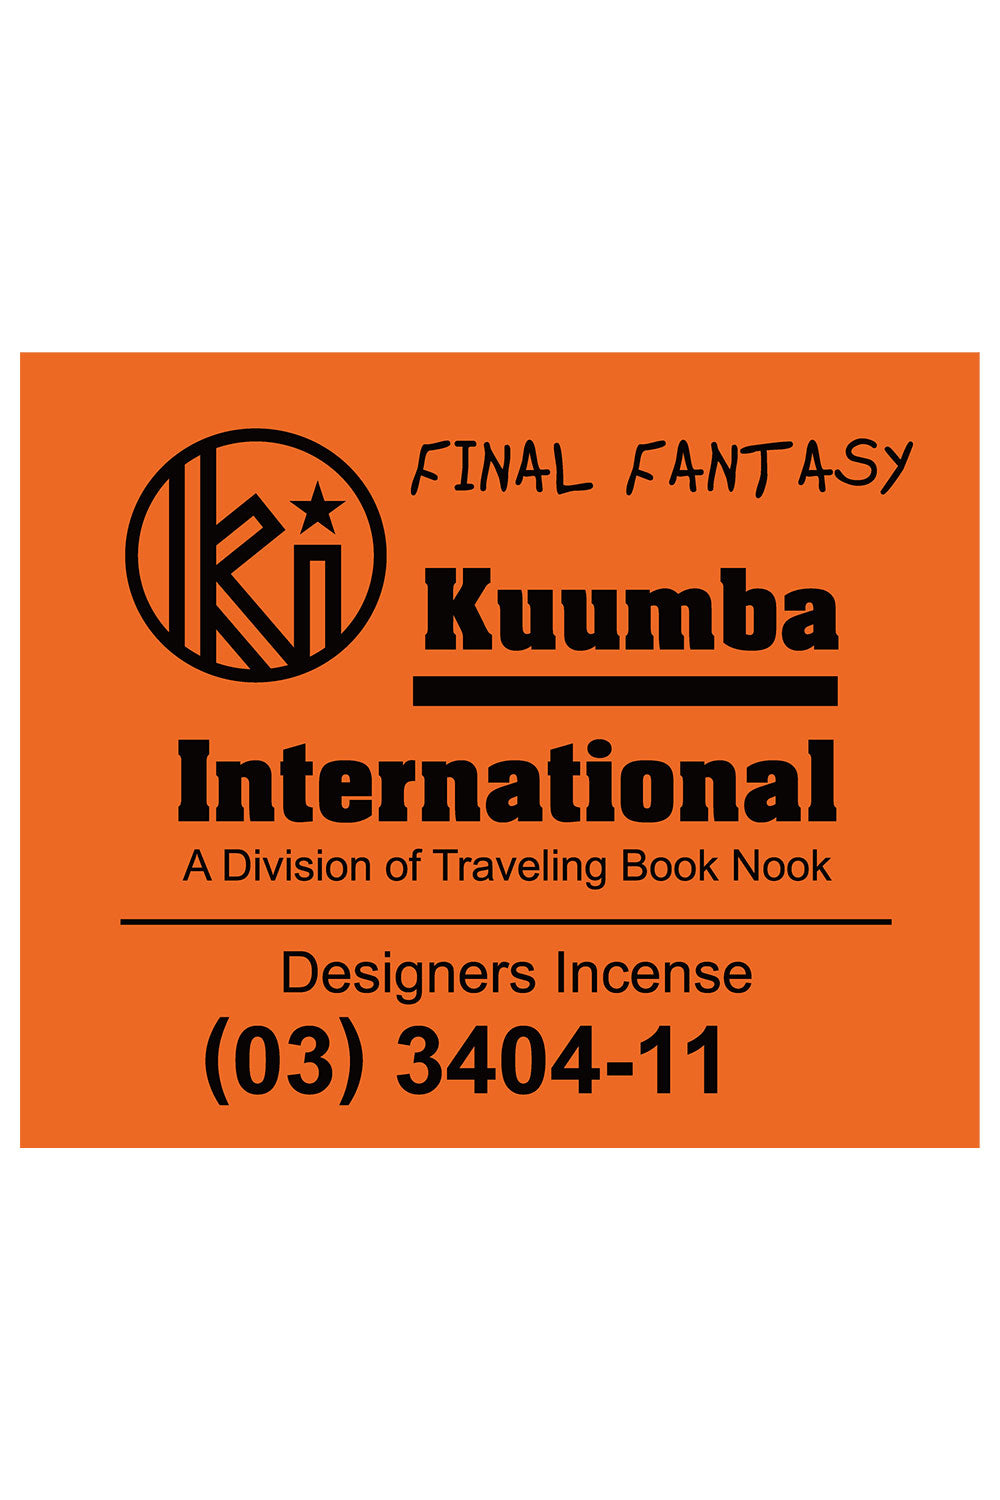 The KUUMBA - DESIGNERS INCENSE 30 PACK 1/2 SIZE FINAL FANTASY available online with global shipping, and in PAM Stores Melbourne and Sydney.